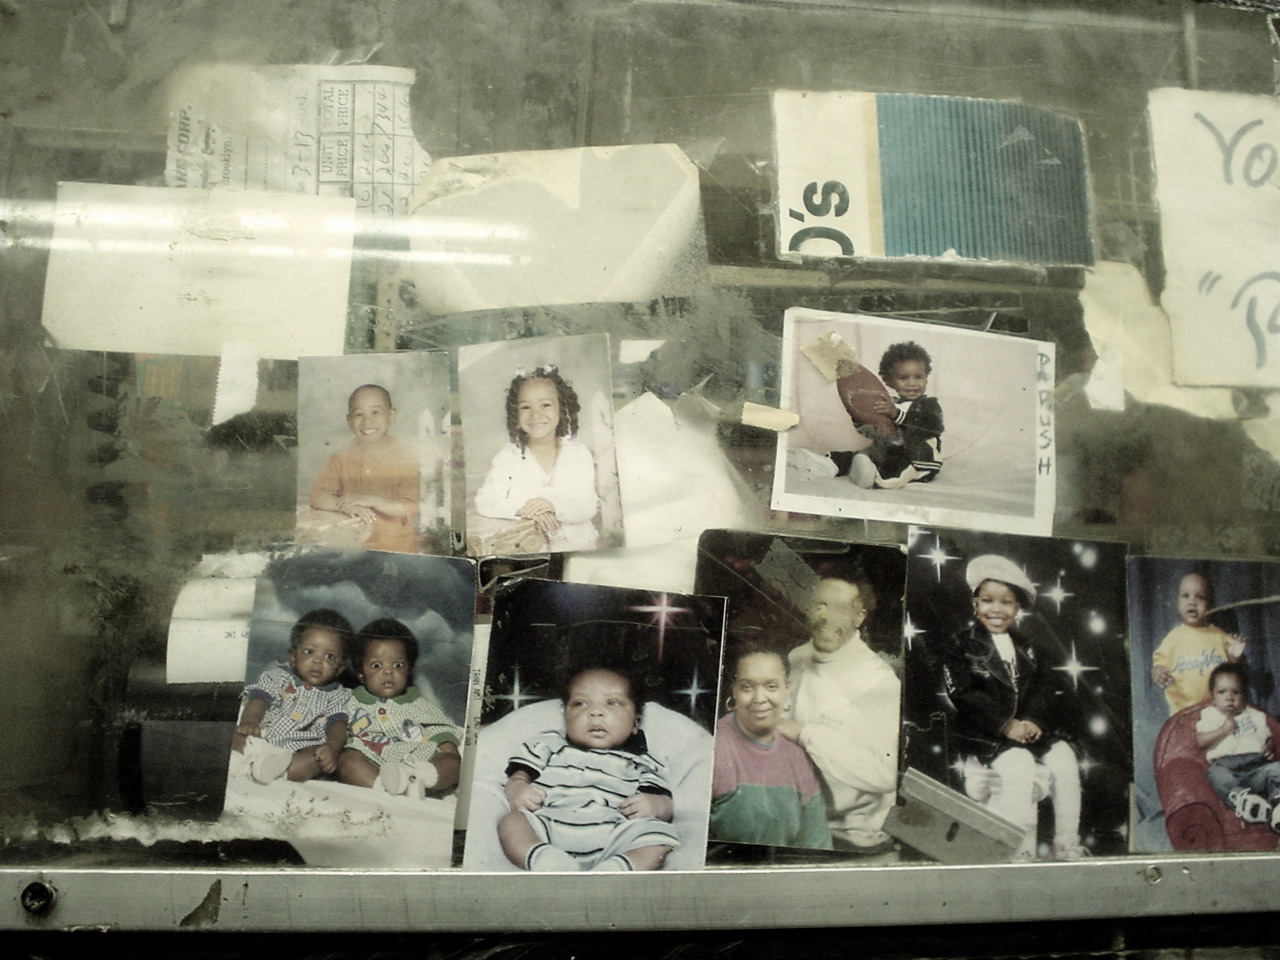 NEIGHBORHOOD KIDS PHOTOS TAPED TO THE BULLET PROOF GLASS OF THE BODEGA